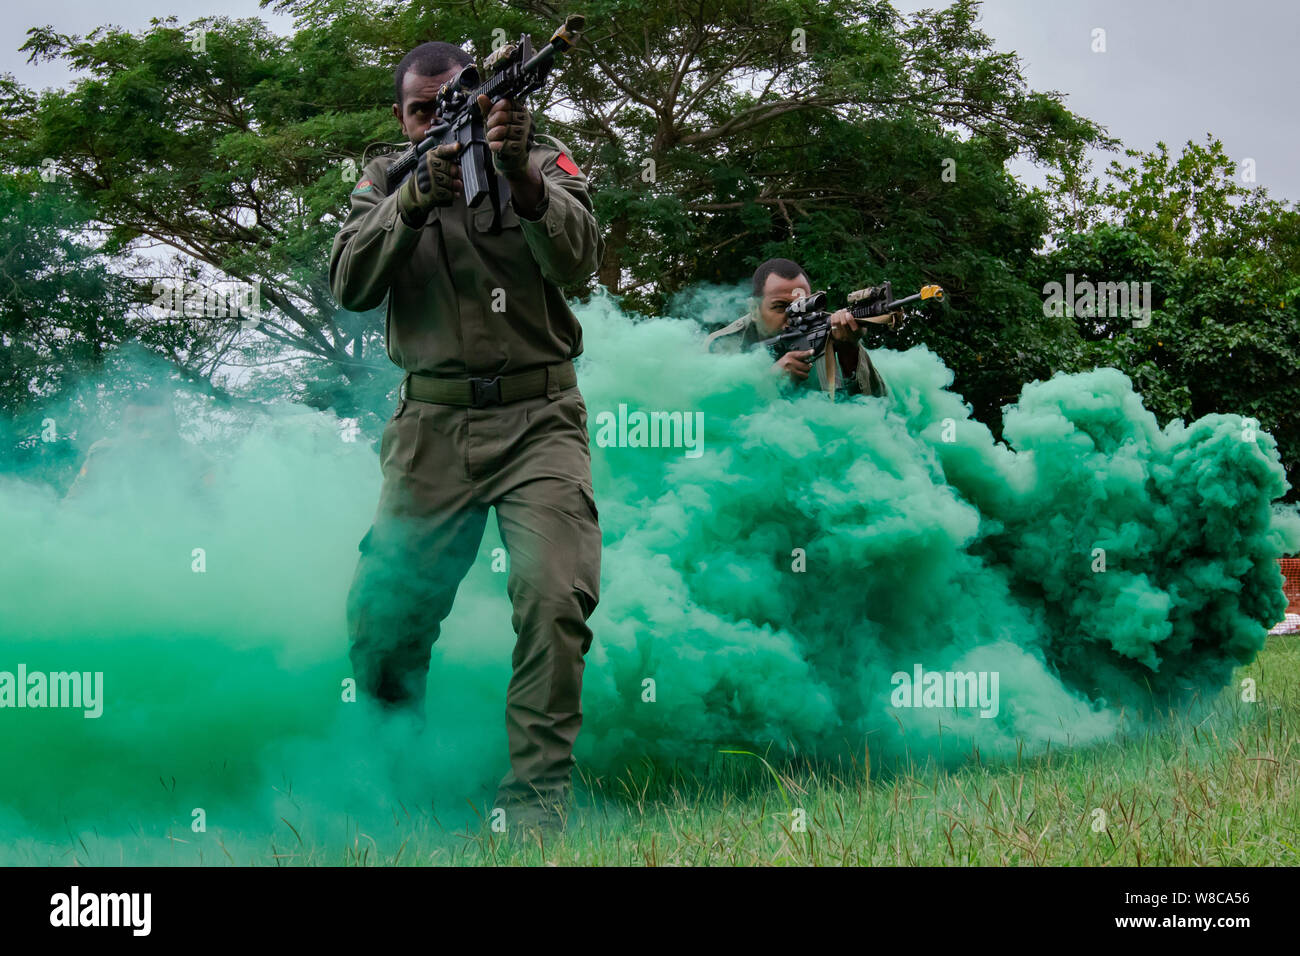 Two Fijian Soldiers serving with the 3rd Battalion, Fiji Infantry Regiment, move tactically through smoke during military operations in urban terrain (MOUT) training in Savusavu, Fiji, Aug. 3, 2019. The MOUT training was conducted by the 1st Battalion, 27th Inf. Regt., 2nd Brigade, Inf. Brig. Combat Team, 25th Inf. Div., which was part of Exercise Cartwheel 2019, which is a bilateral training that develops the Republic of Fiji Military Forces capabilities. The exercises focus is to increase the strength and security of both military forces for a free and open Indo-Pacific. Stock Photo